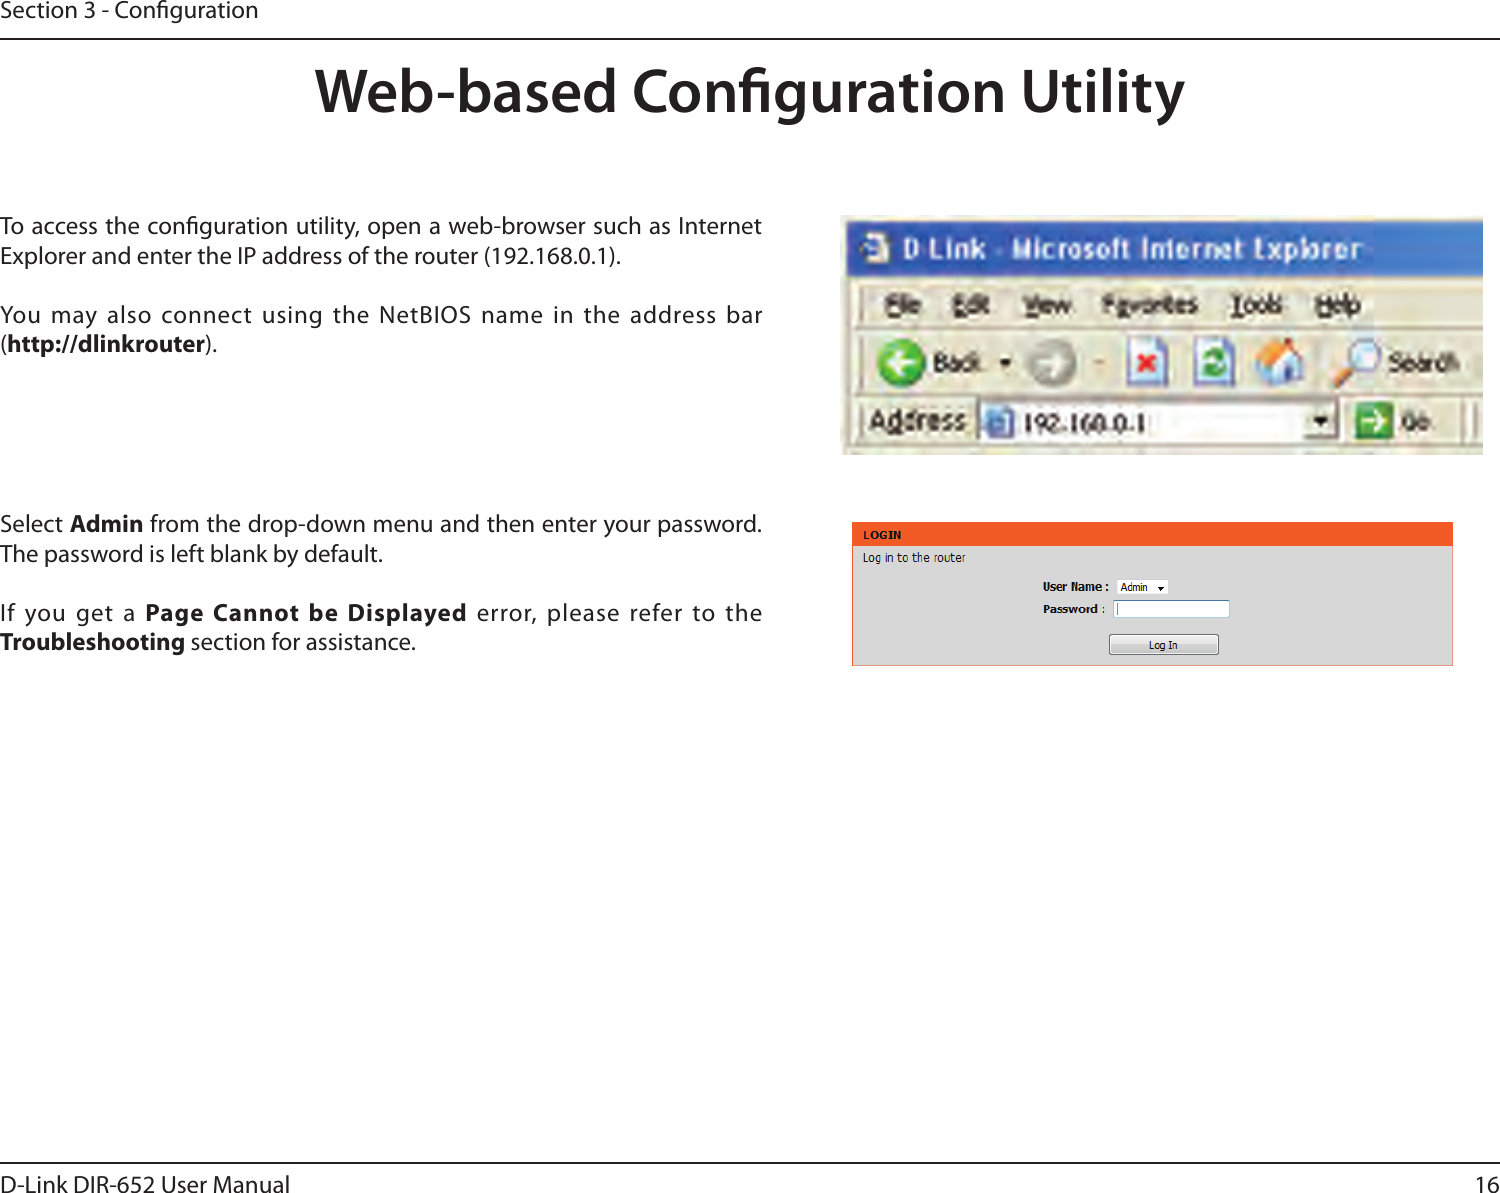 16D-Link DIR-652 User ManualSection 3 - CongurationWeb-based Conguration UtilityTo access the conguration utility, open a web-browser such as Internet Explorer and enter the IP address of the router (192.168.0.1).You  may also  connect using the  NetBIOS name in  the address bar (http://dlinkrouter).Select Admin from the drop-down menu and then enter your password. The password is left blank by default.If  you  get  a  Page  Cannot  be  Displayed  error,  please  refer  to  the Troubleshooting section for assistance.